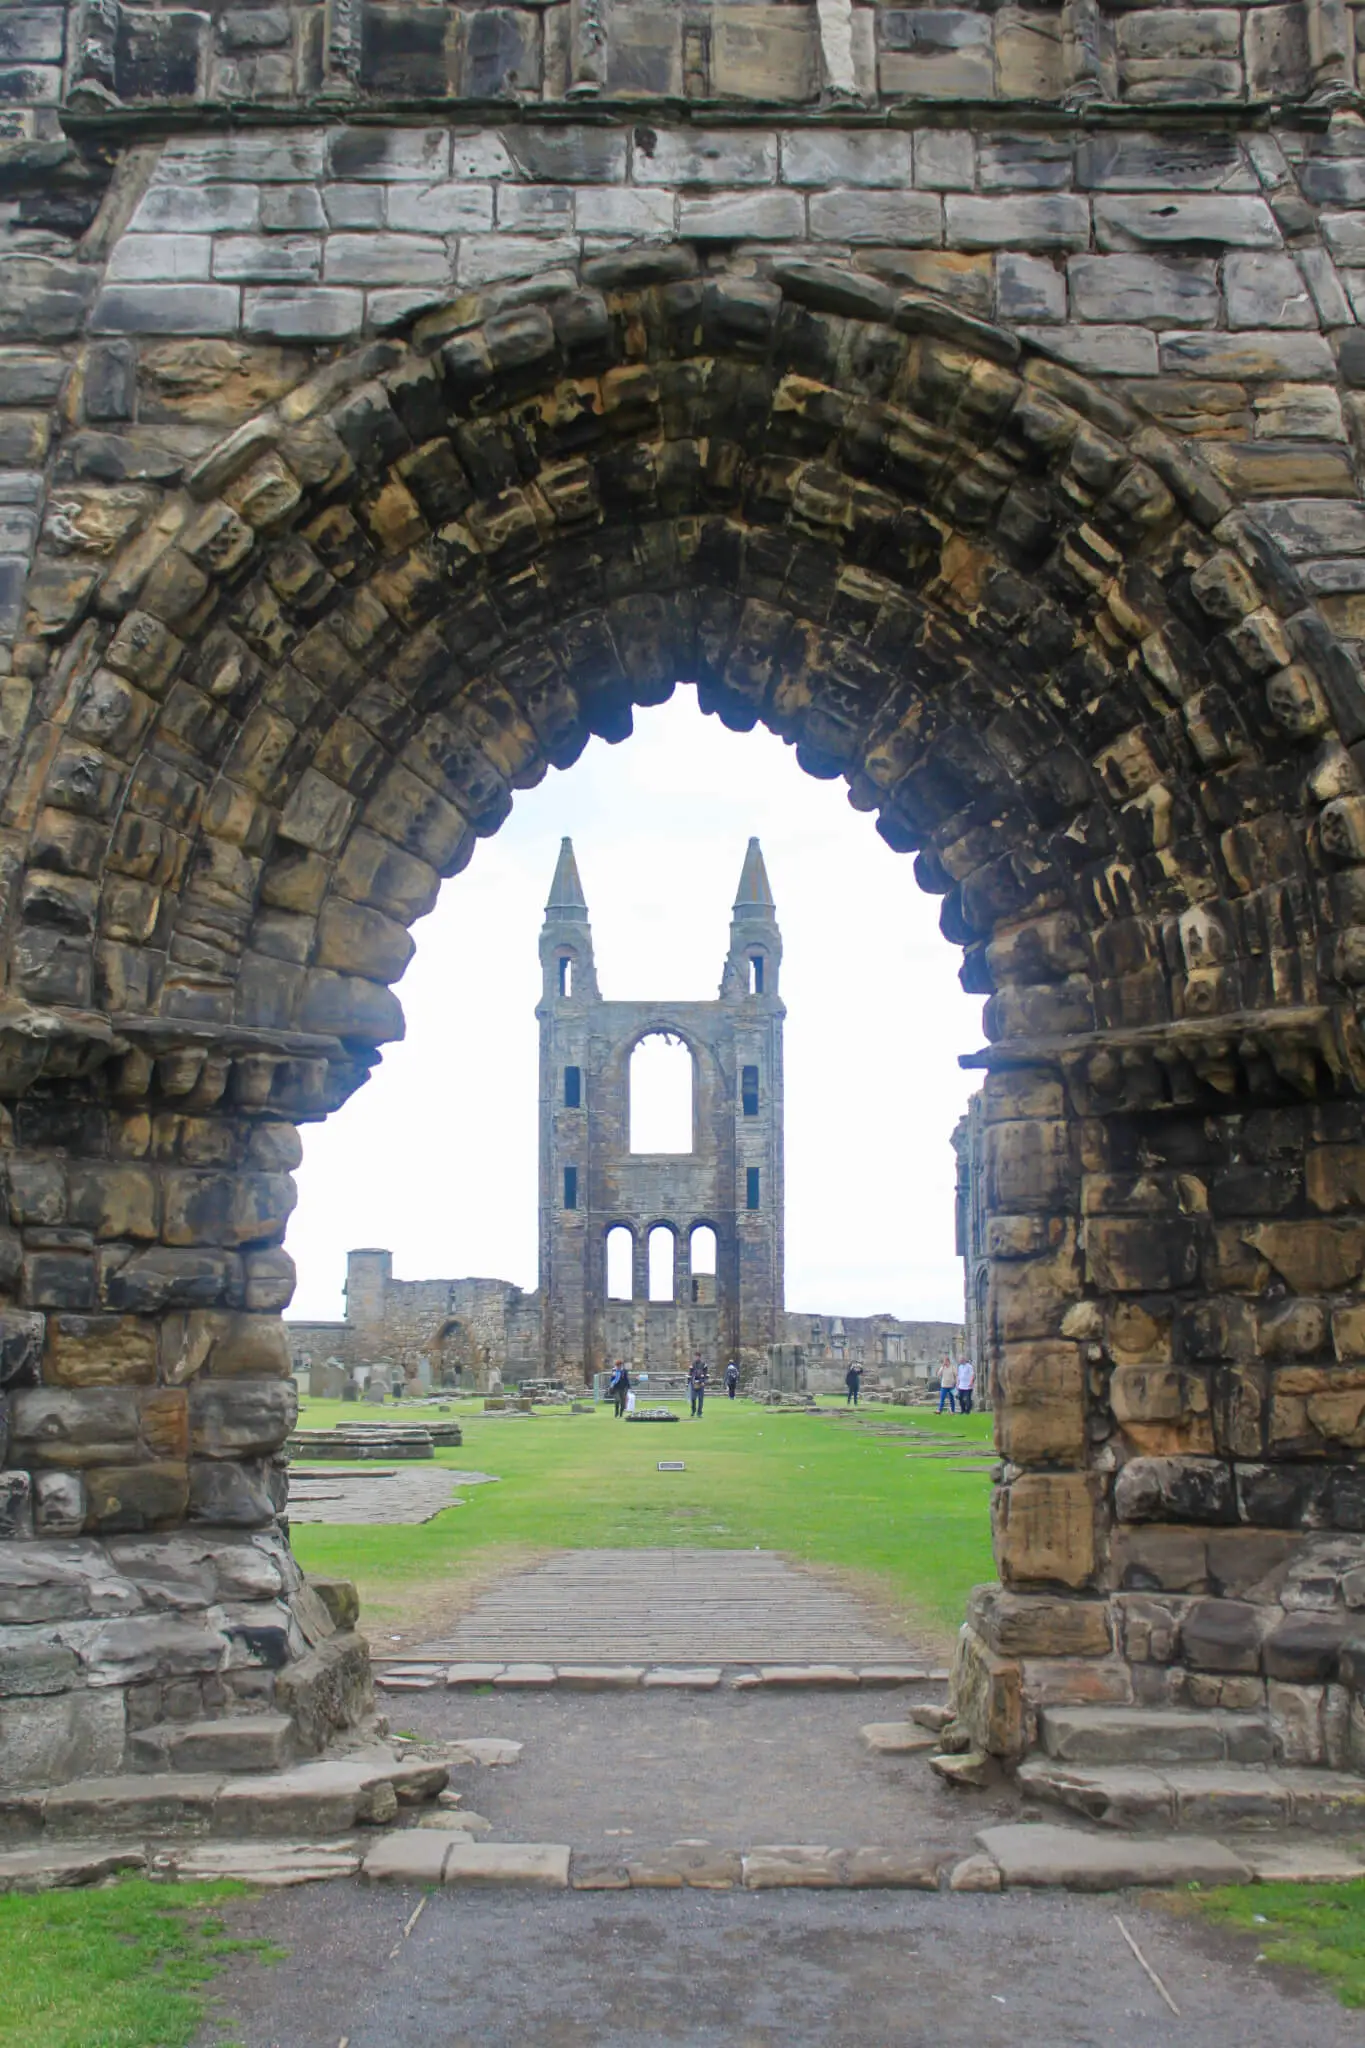 View of ruined towers of St. Andrews Cathedral as seen through open entryway in other ruins